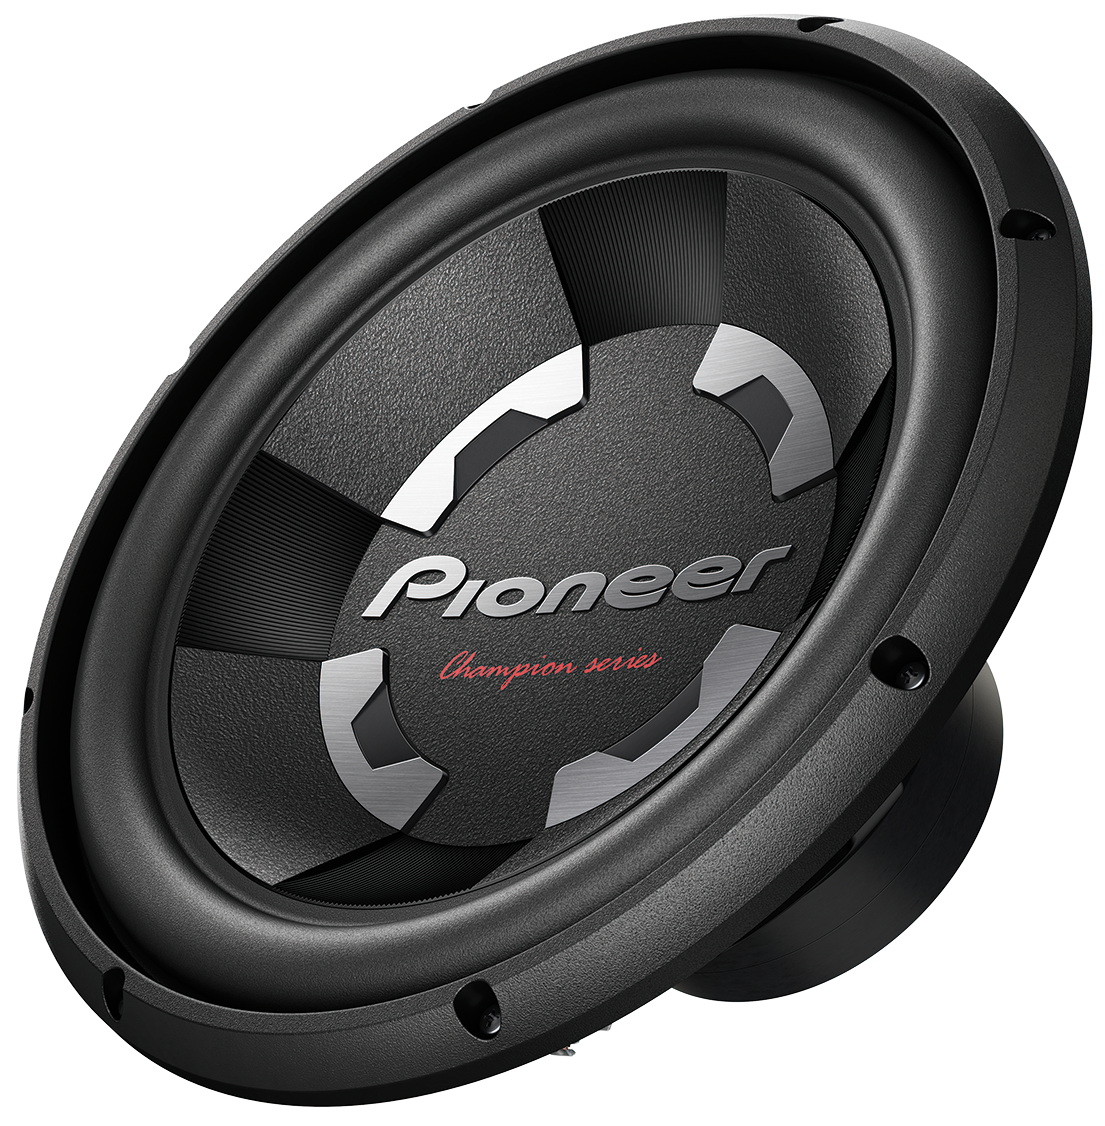 Pioneer TS-300D4 Auto-Subwoofer-Chassis 30cm 1400W 4 